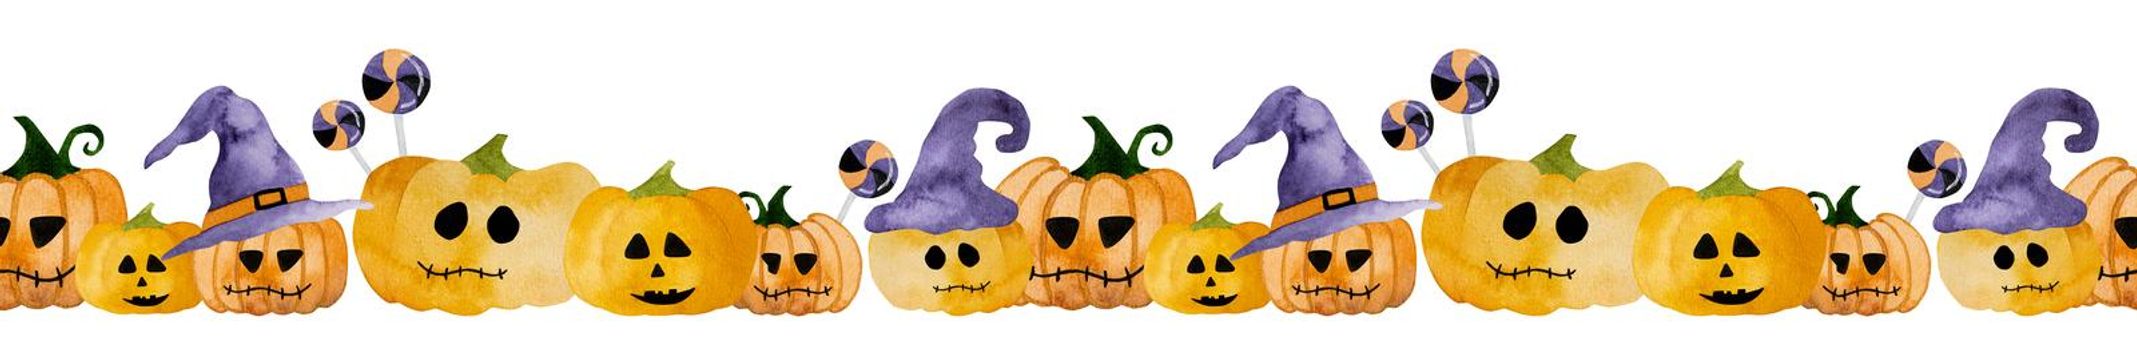 Halloween watercolor cute pumpkin illustration for funny holiday horizontal postcard. Autumn scary vegetables illustration for creepy decoration